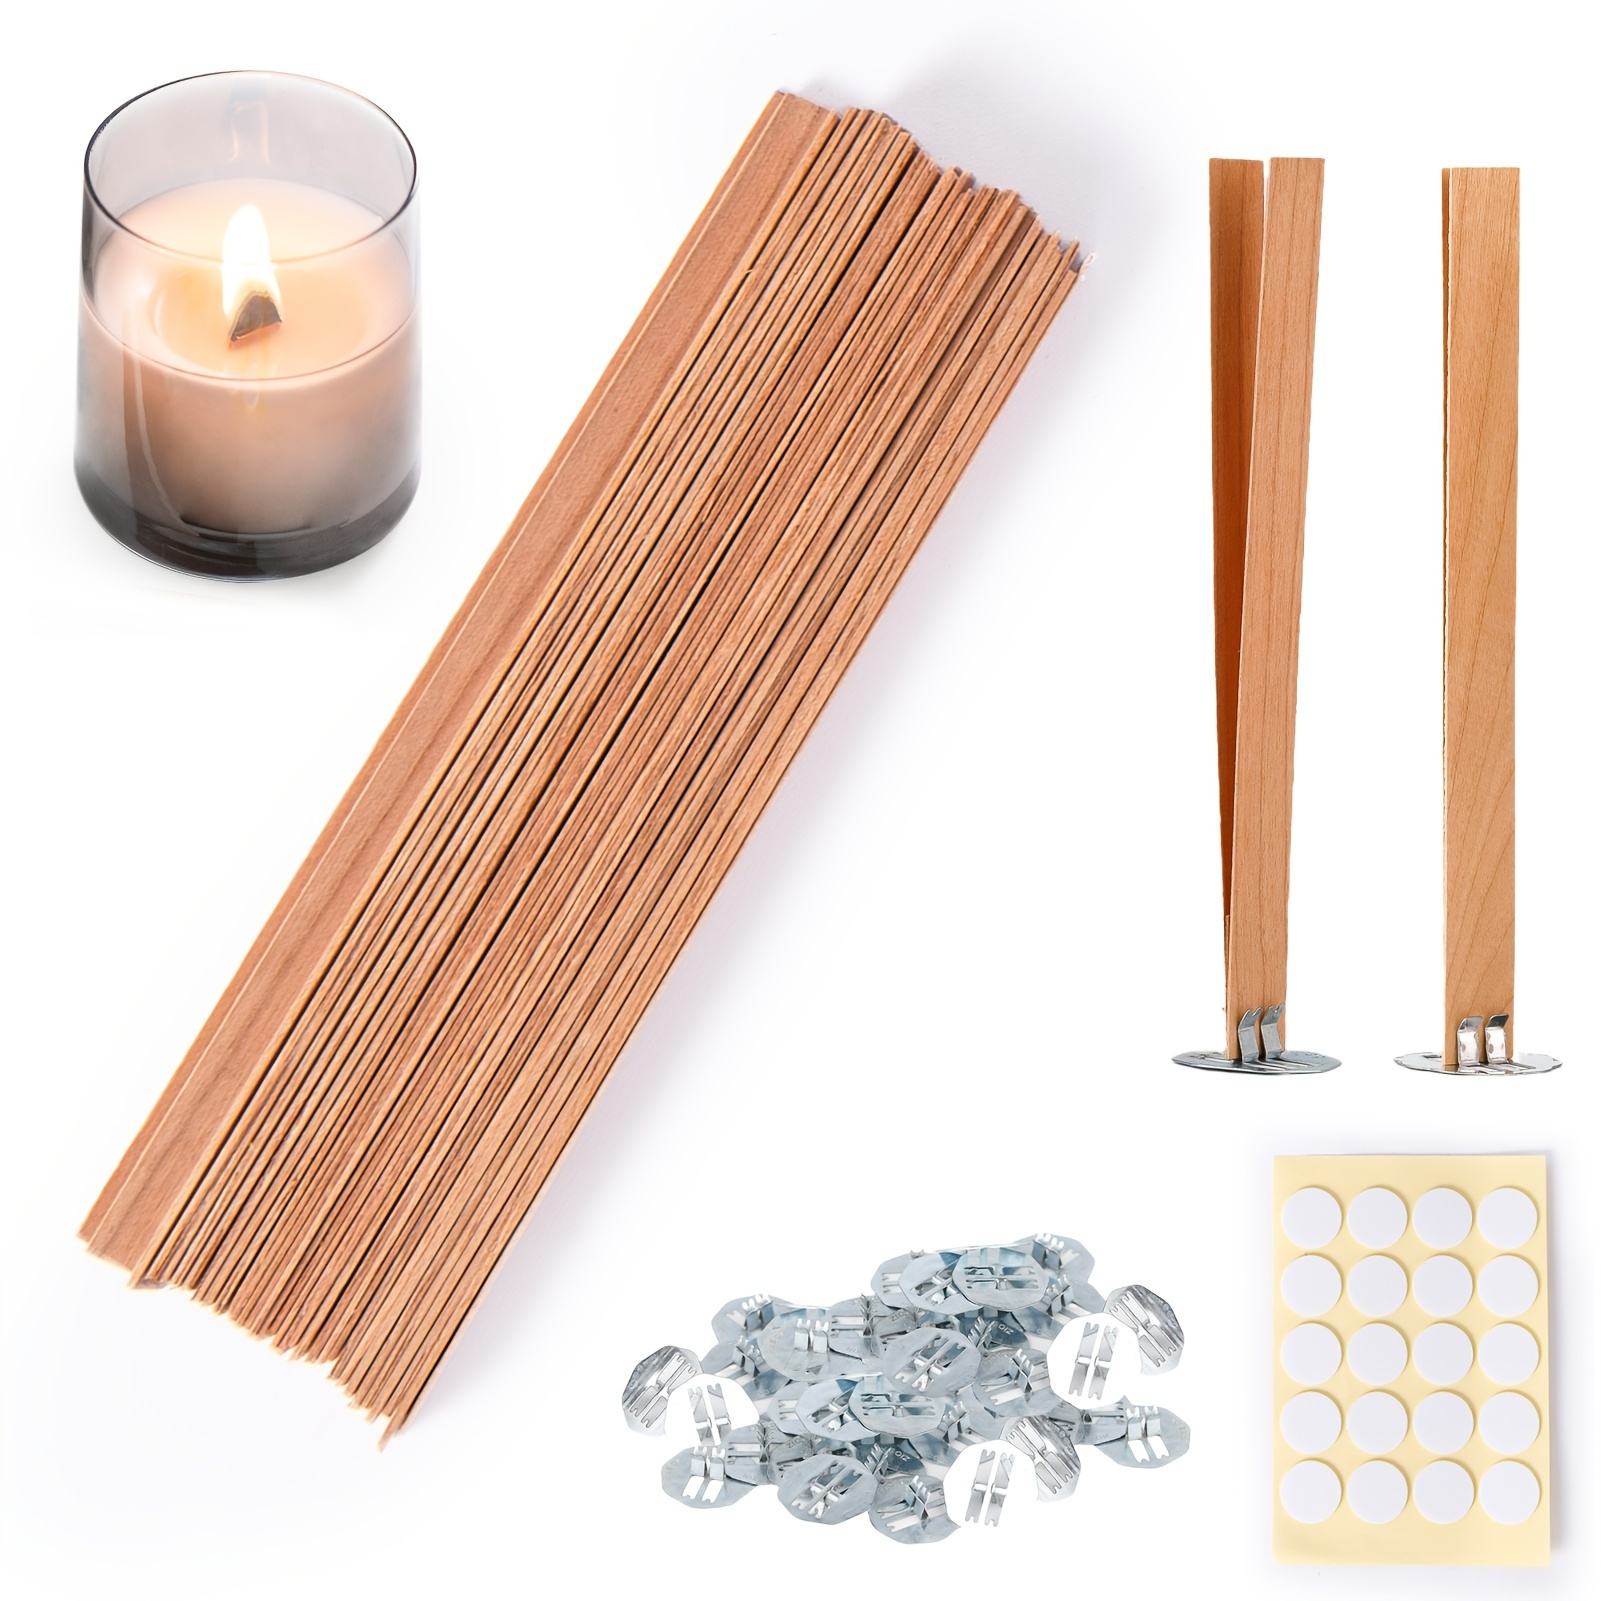 40pcs Smokeless Cherry Wood Candle Wicks-Wooden Wick Long Lasting  Flame-Easily Burn,Natural Candle Cores With 20pc Stand And 20pcs Glue Dot